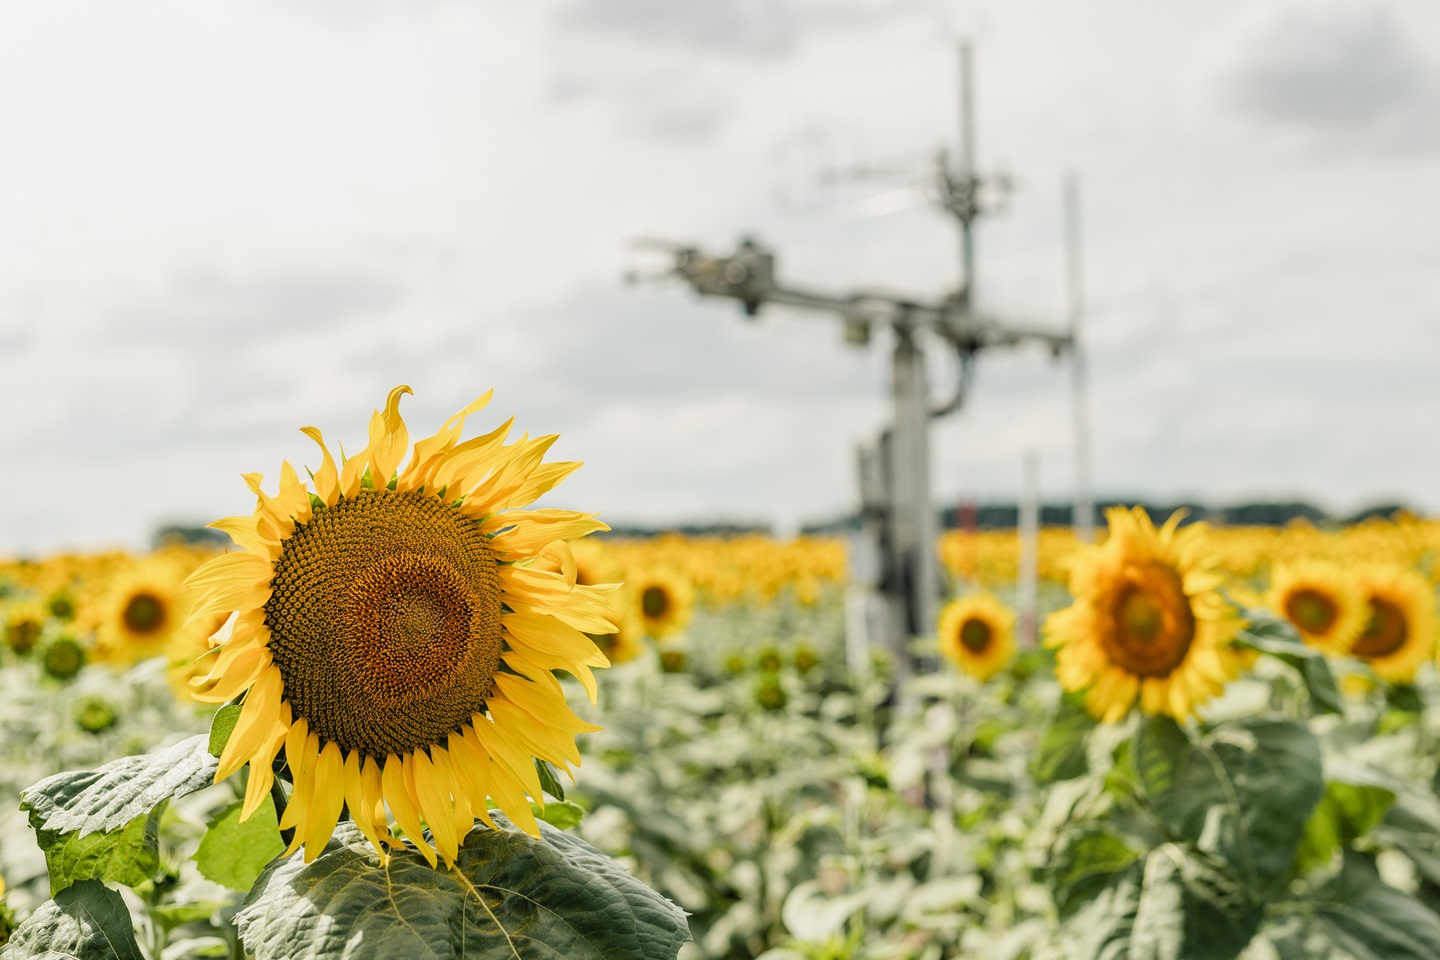 An eddy covariance station in the middle of a sun flower field